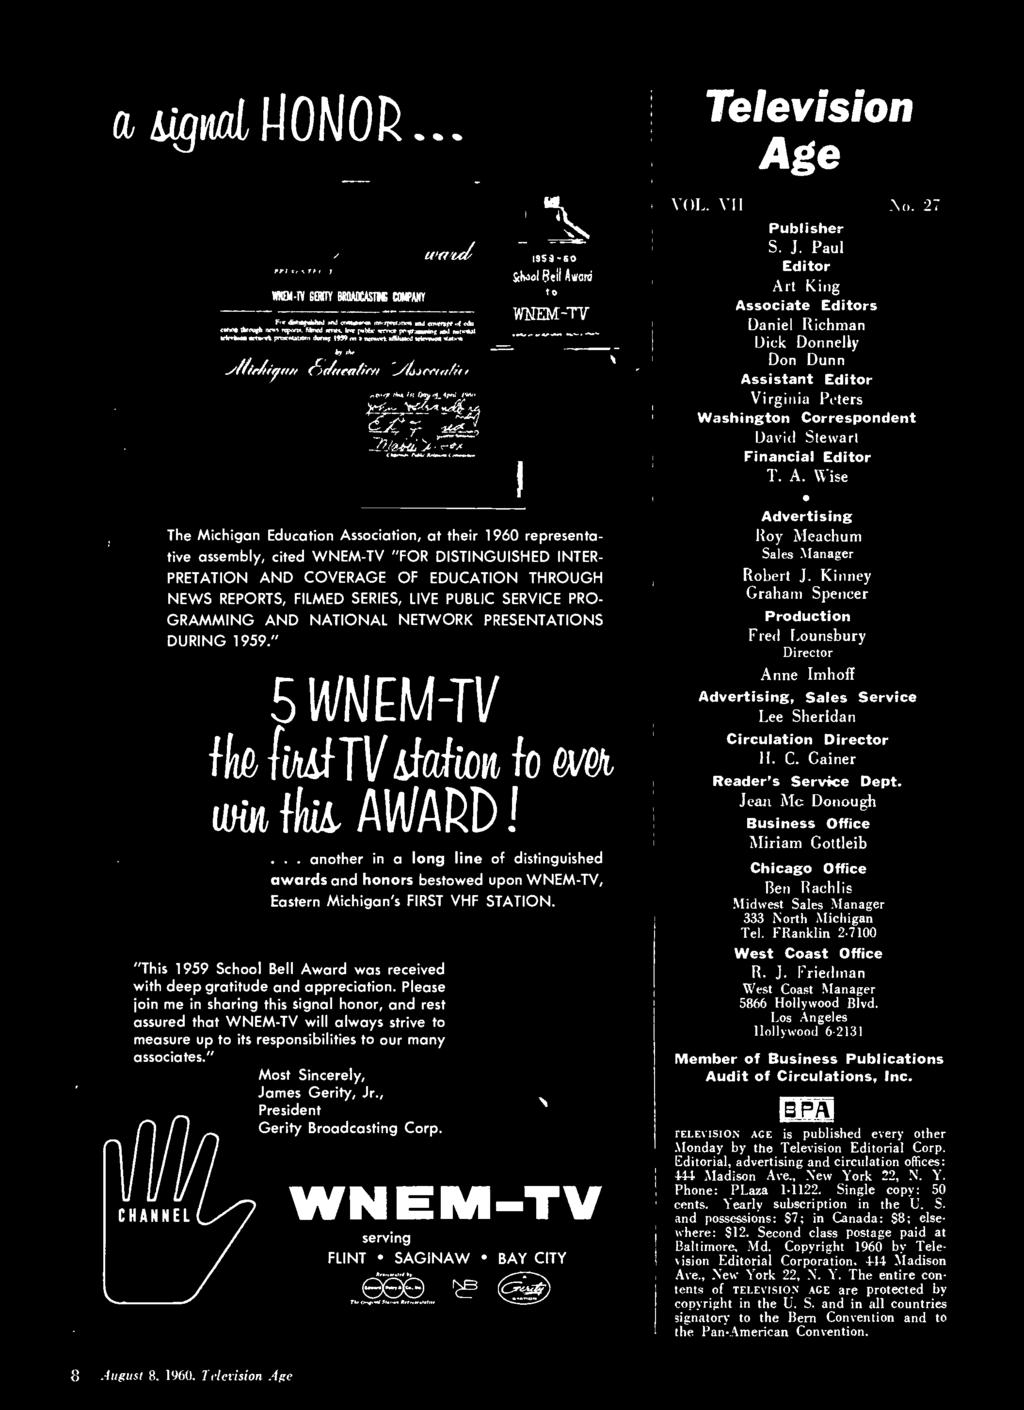 PUBLIC SERVICE PRO- GRAMMING AND NATIONAL NETWORK PRESENTATIONS DURING 1959." cluunel 5 WN[M-TV fk fùmtv&falioit fo NO wrn Phis AWARD!